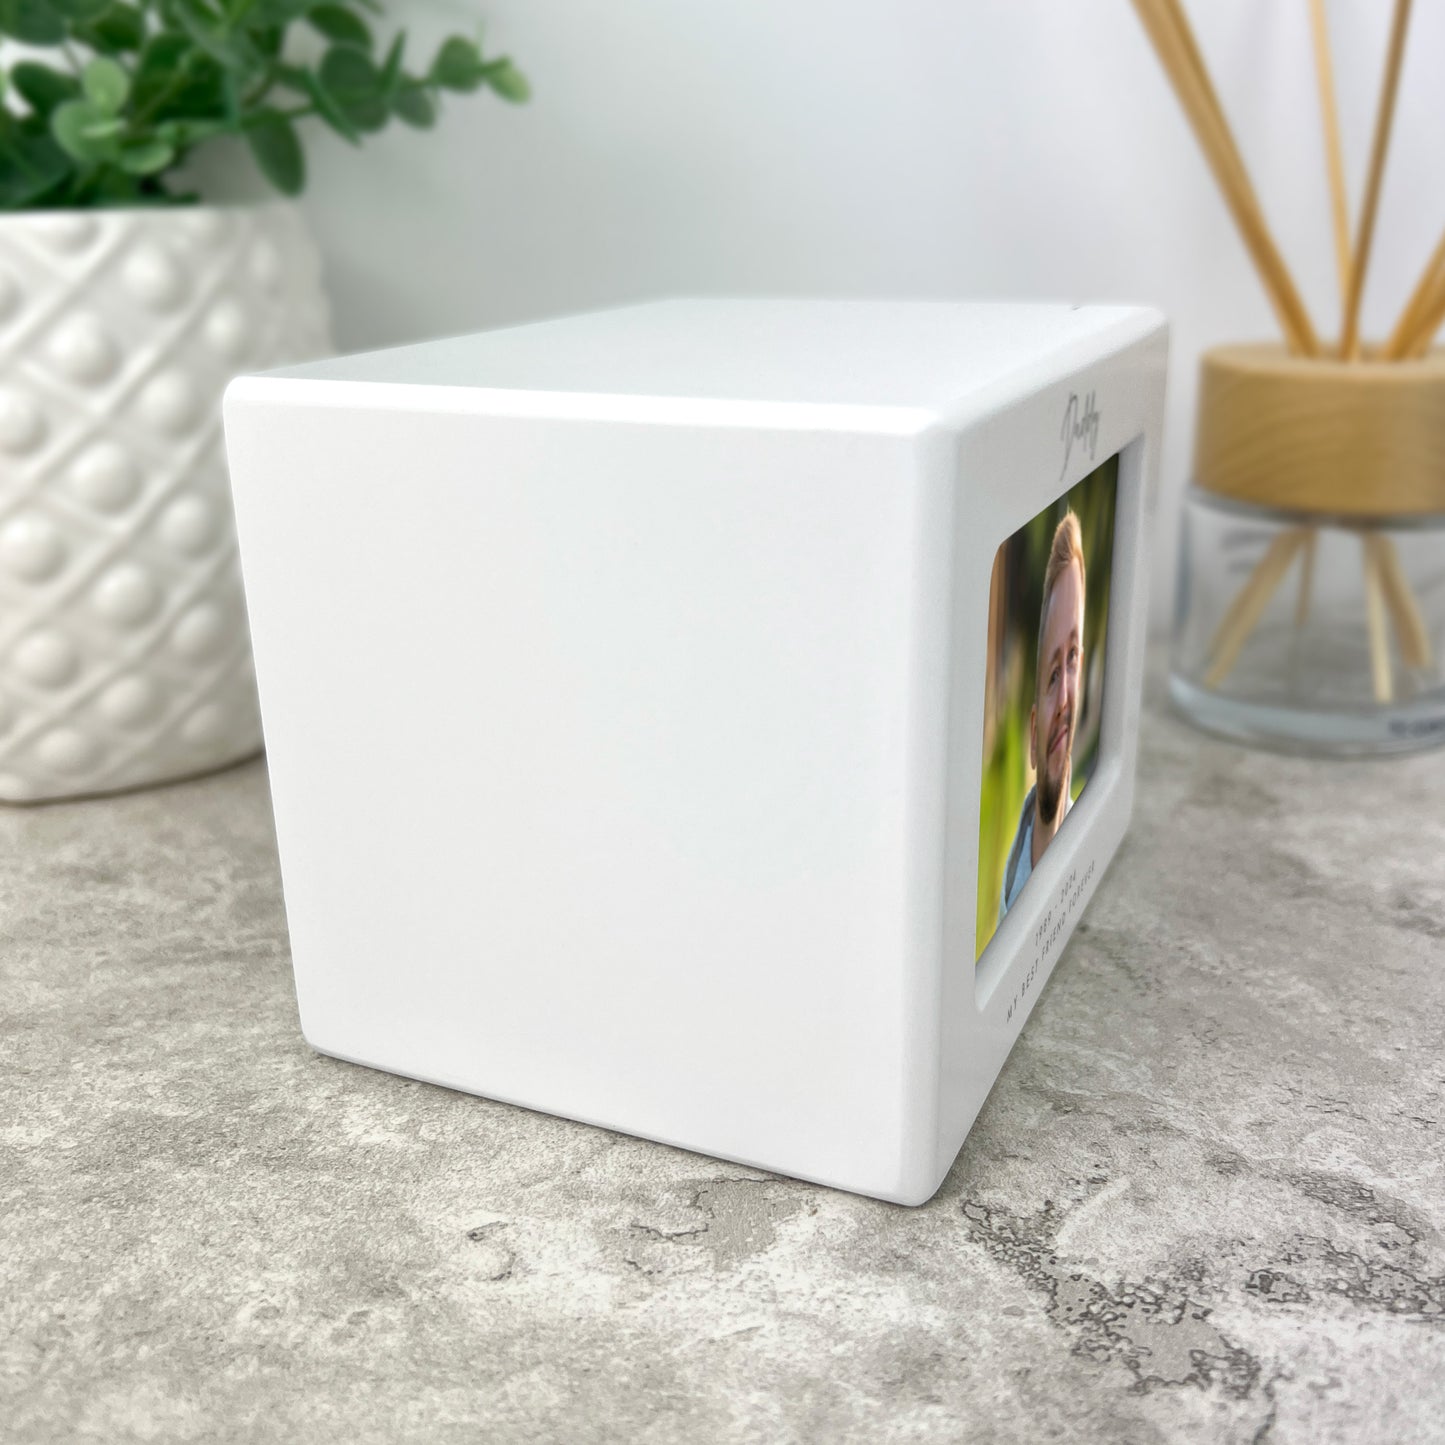 Personalised Cremation Urn For Ashes Holds 9.5cm x 6cm Photo Landscape | 0.51 Litres